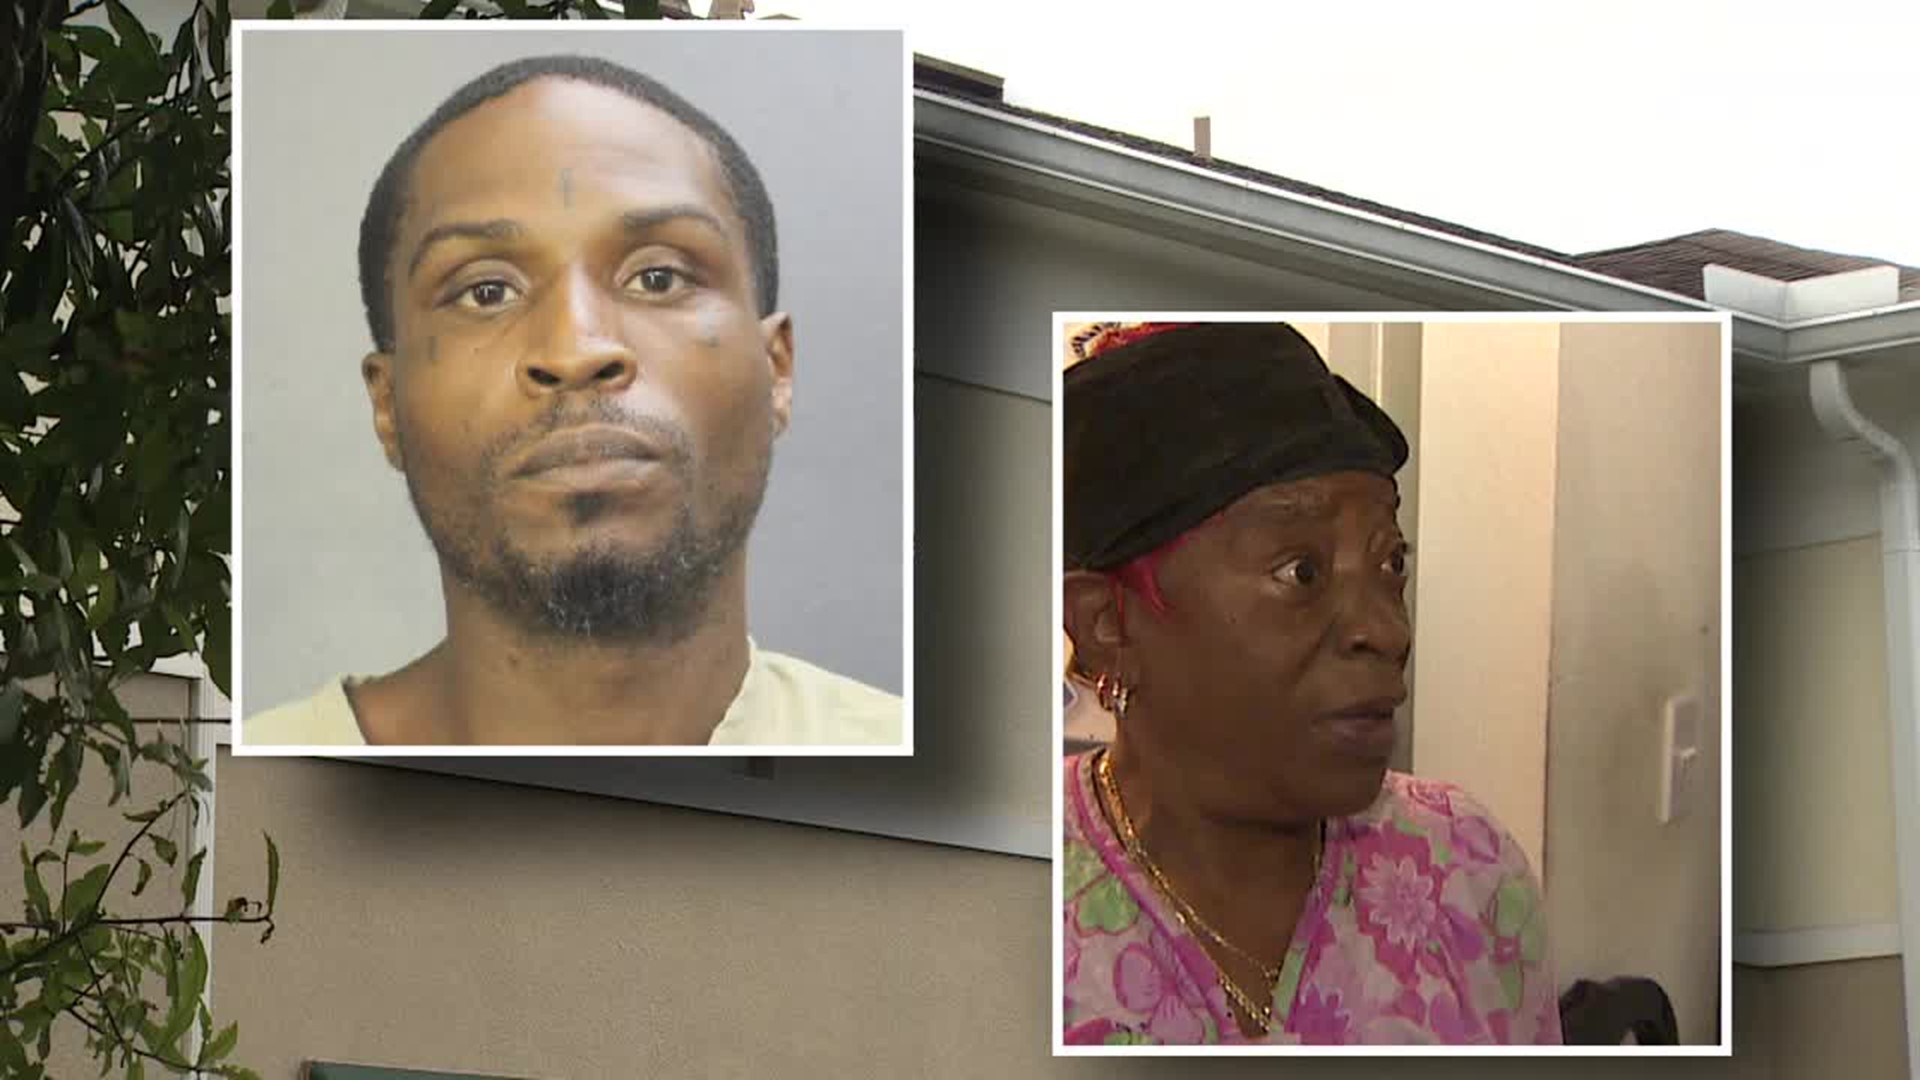 A 61-year-old woman fought off a burglar when he entered her home and he is now in jail.